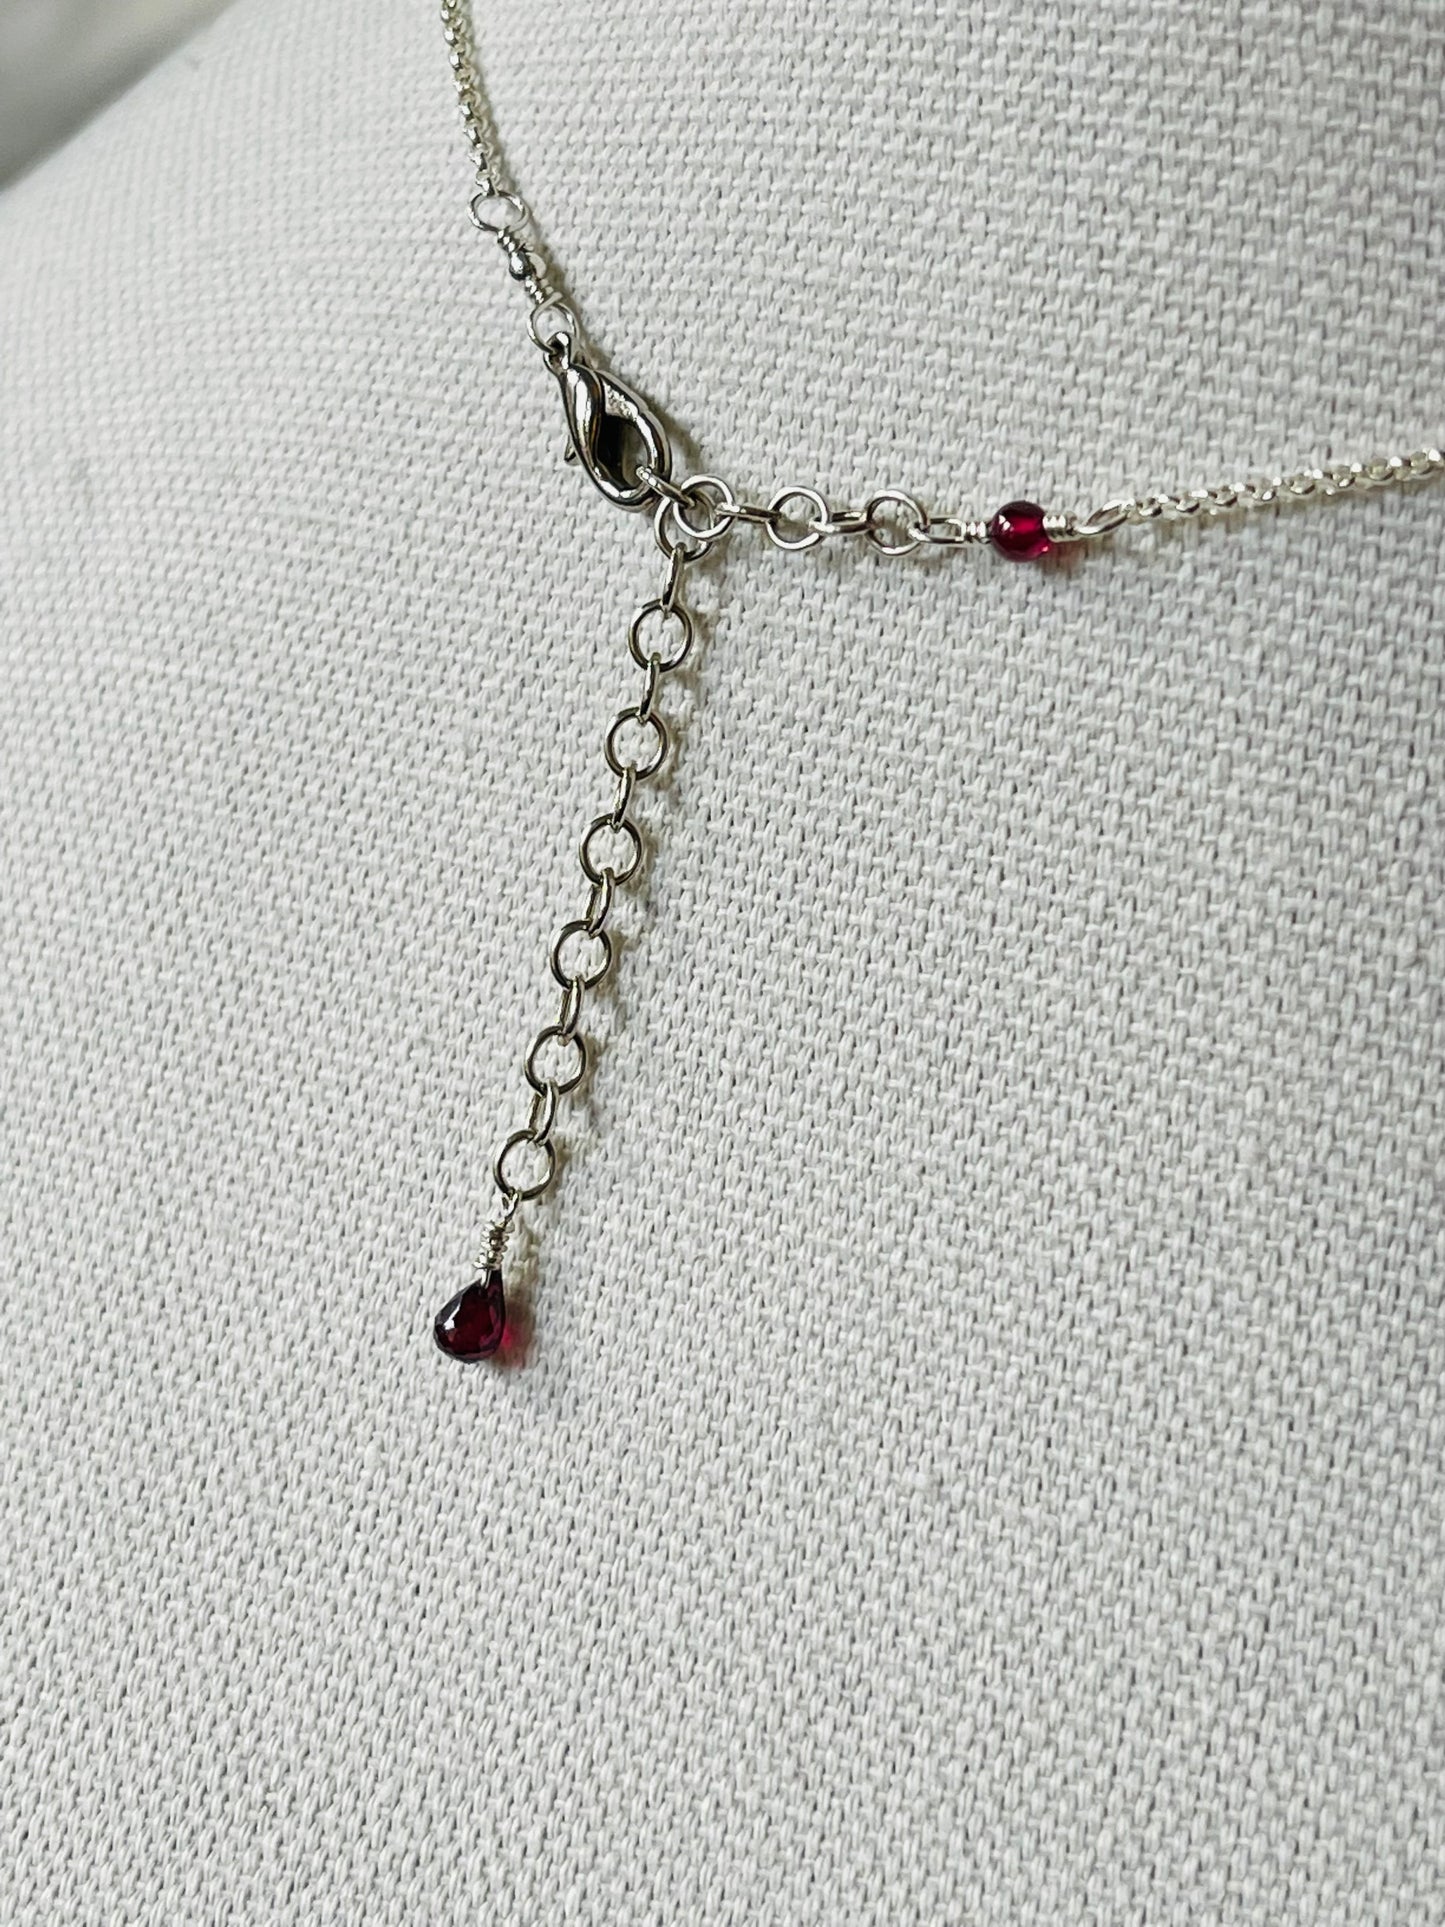 Amor necklace (convertible)